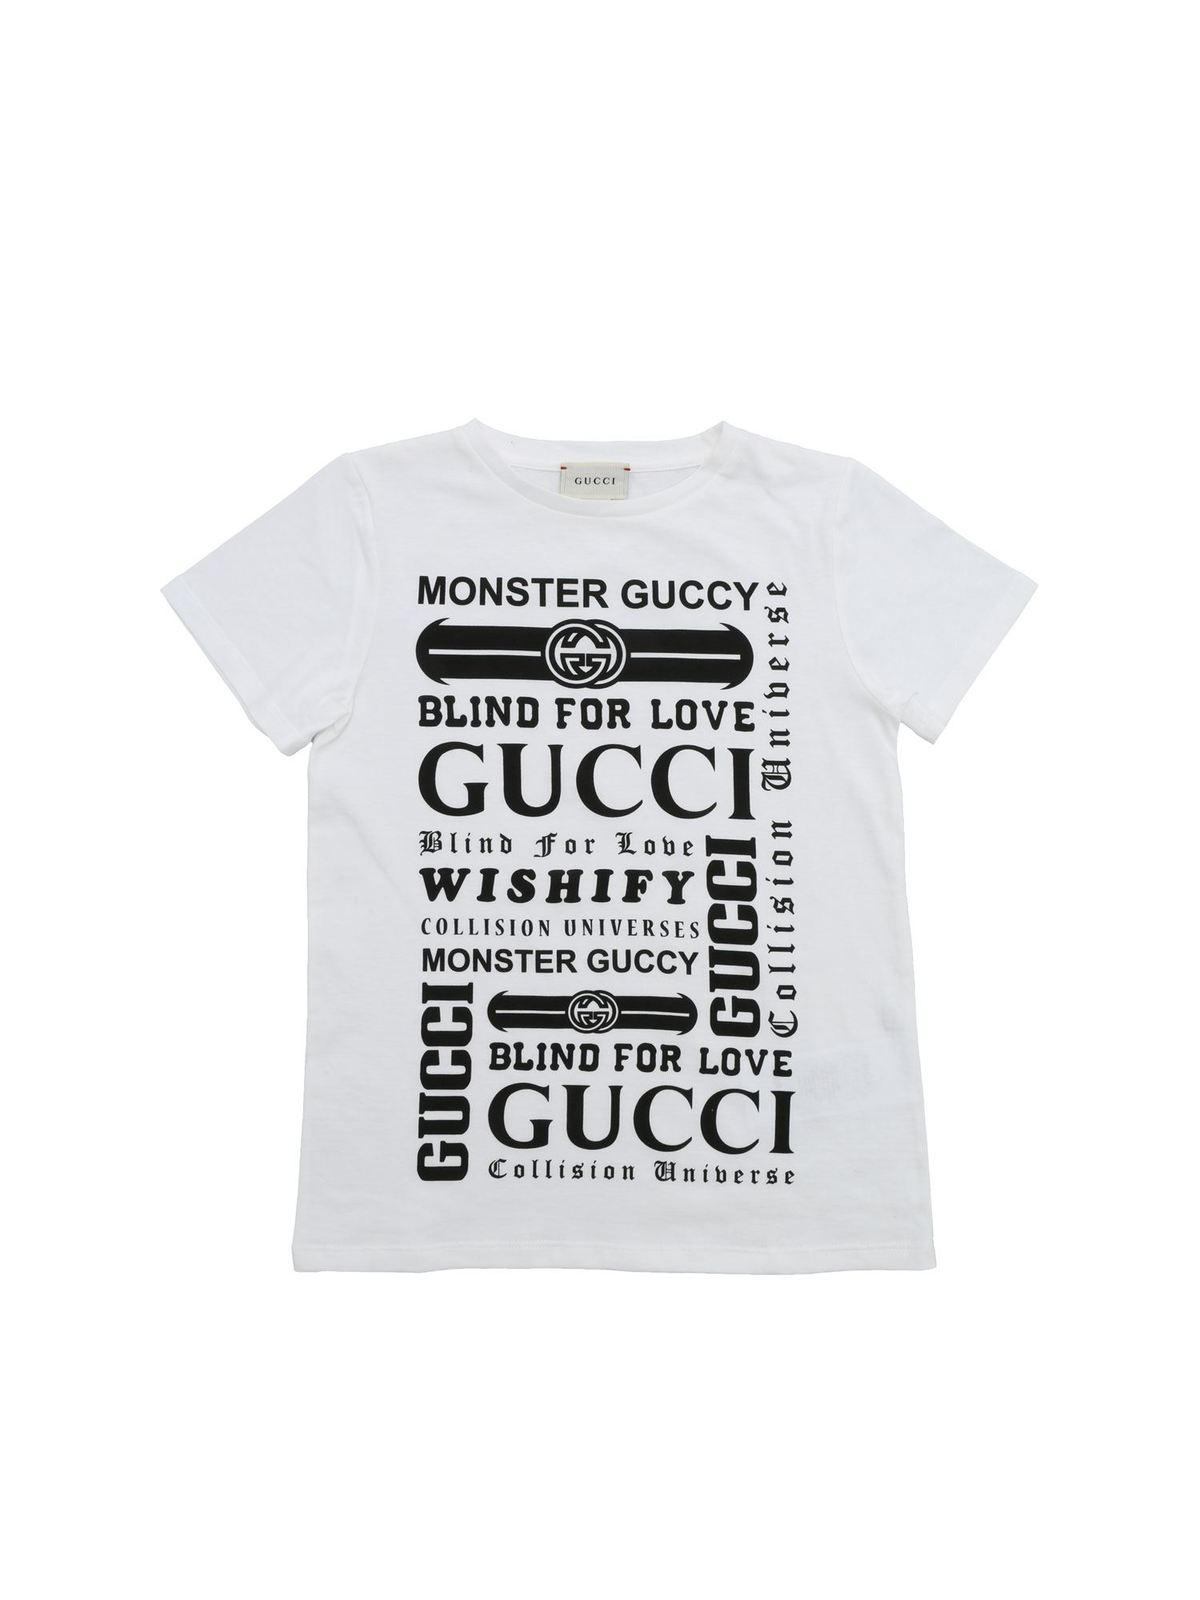 GUCCI T-SHIRT IN WHITE WITH LOGO PRINTS